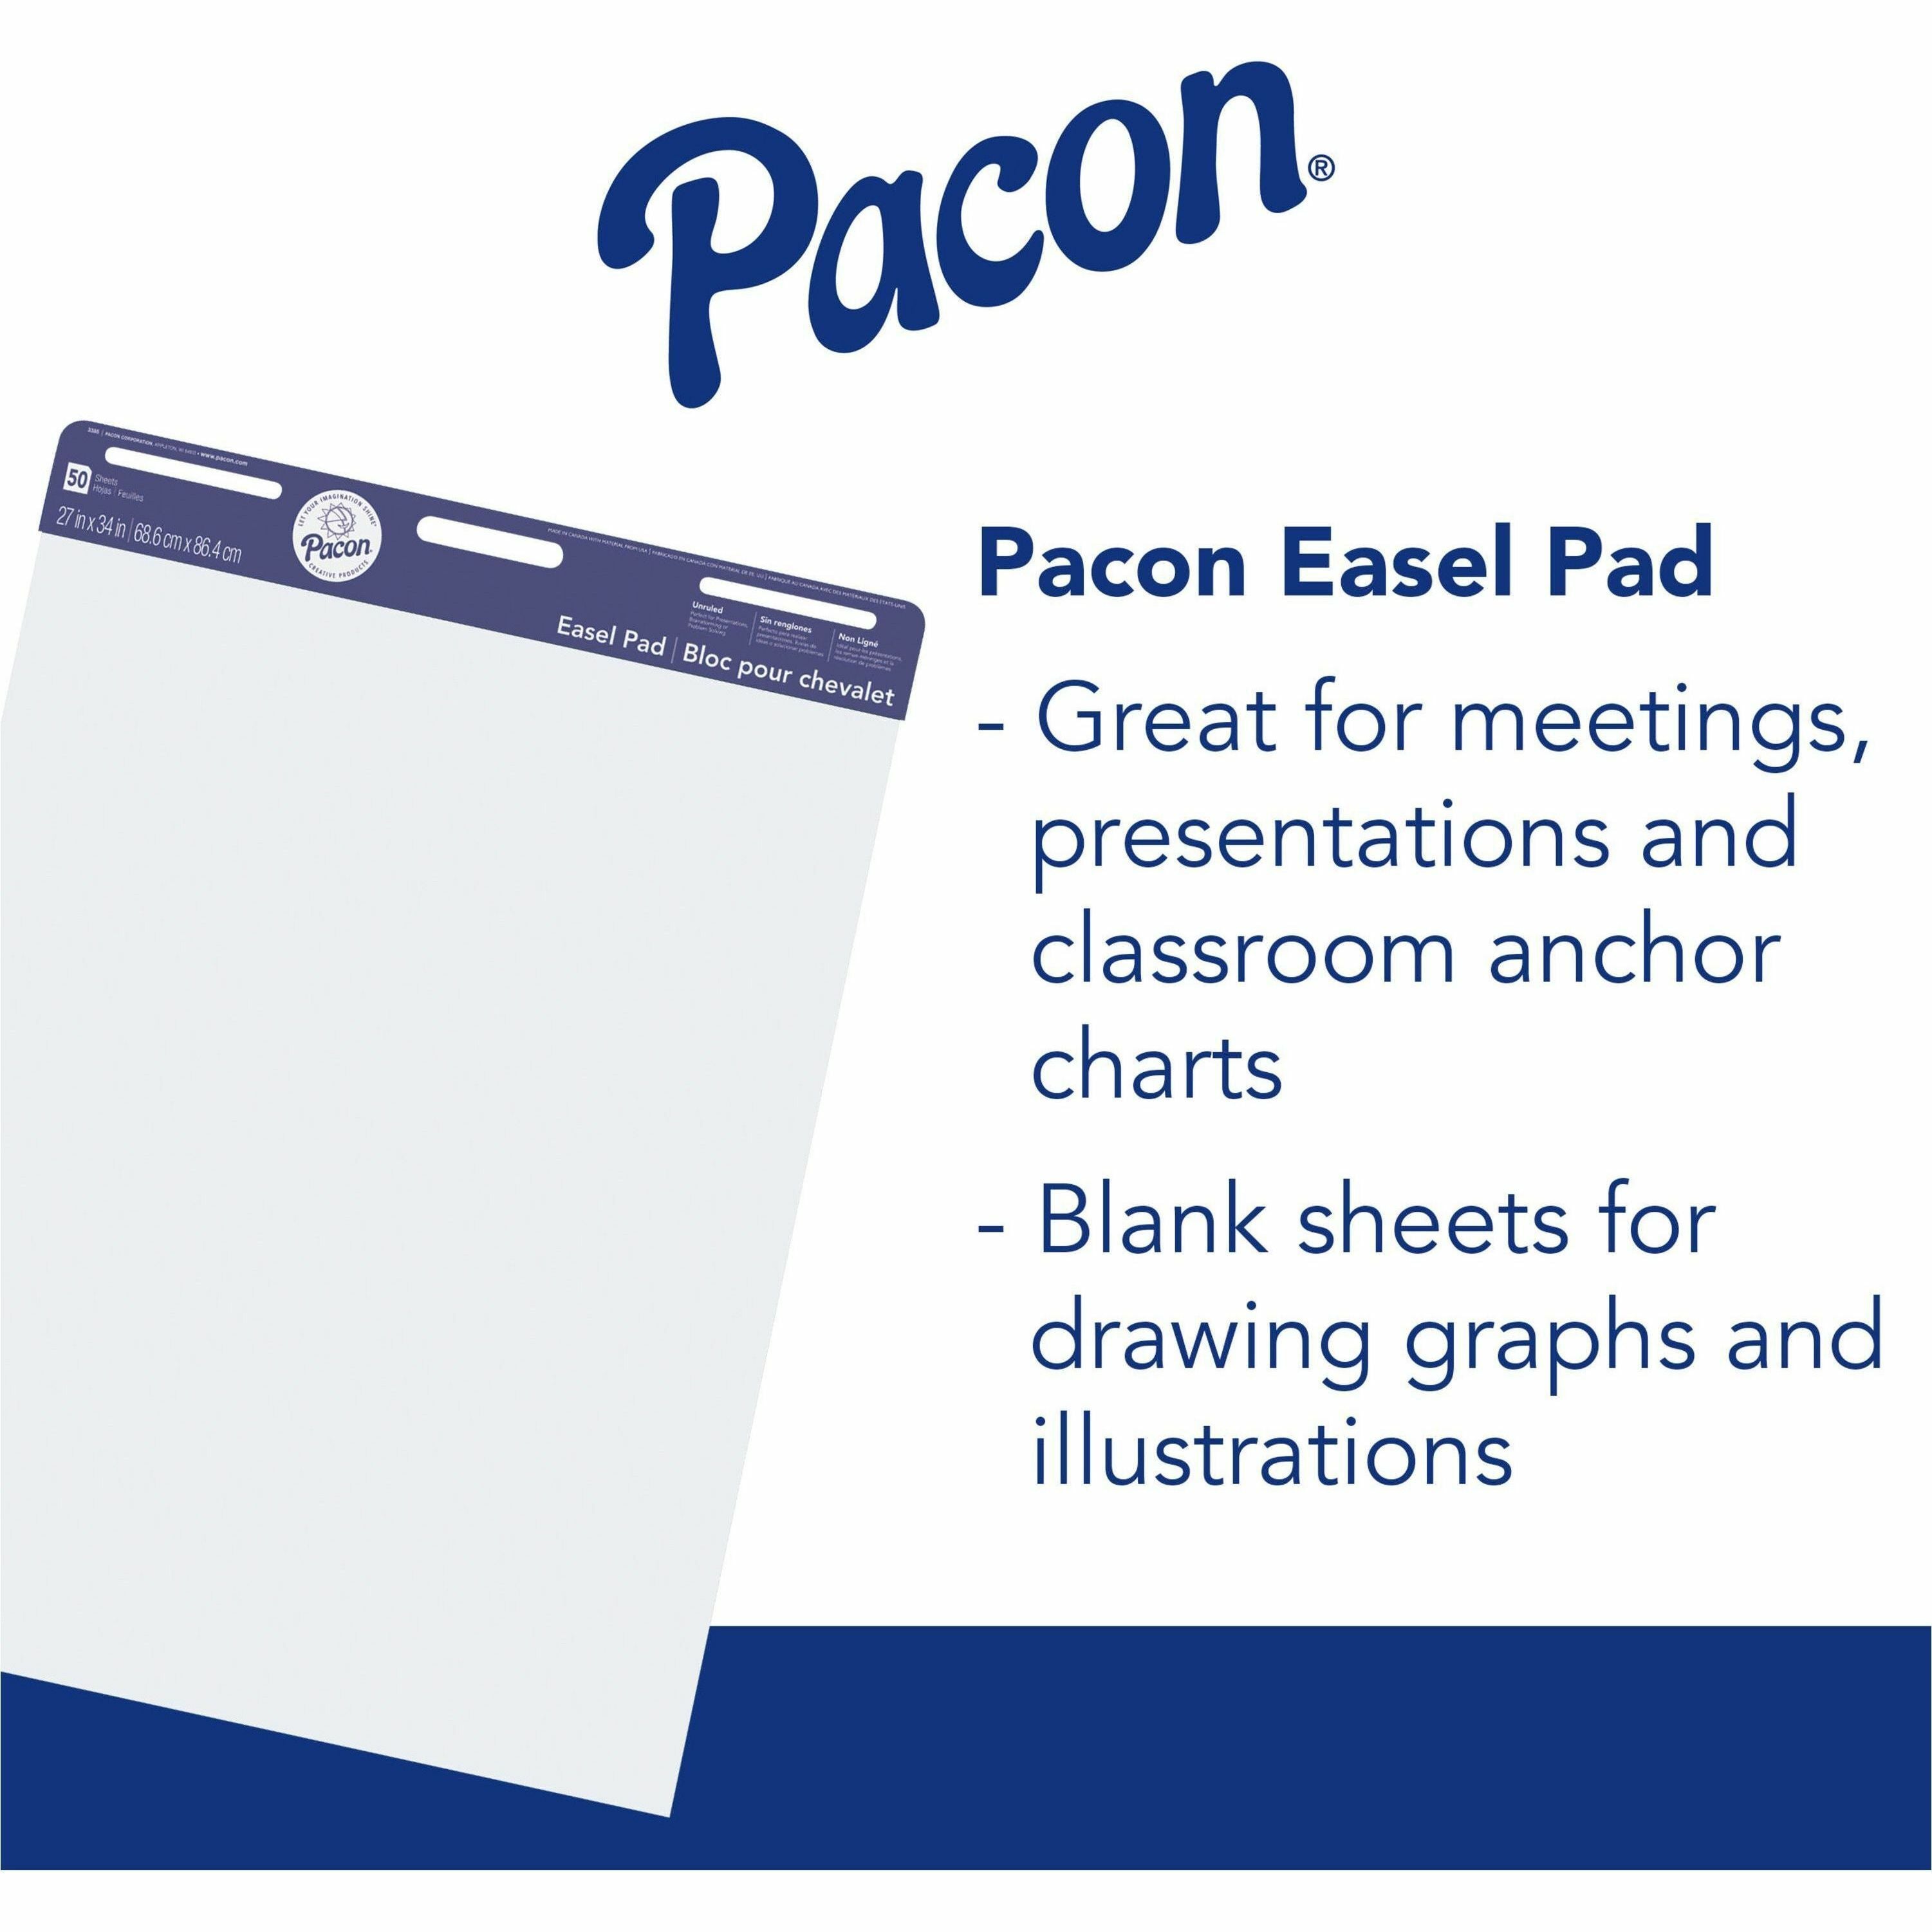 Pacon Unruled Easel Pads - 50 Sheets - Plain - Stapled/Glued - Unruled - 27" x 34" - White Paper - Chipboard Cover - Perforated, Bond Paper - 50 / Pad - 